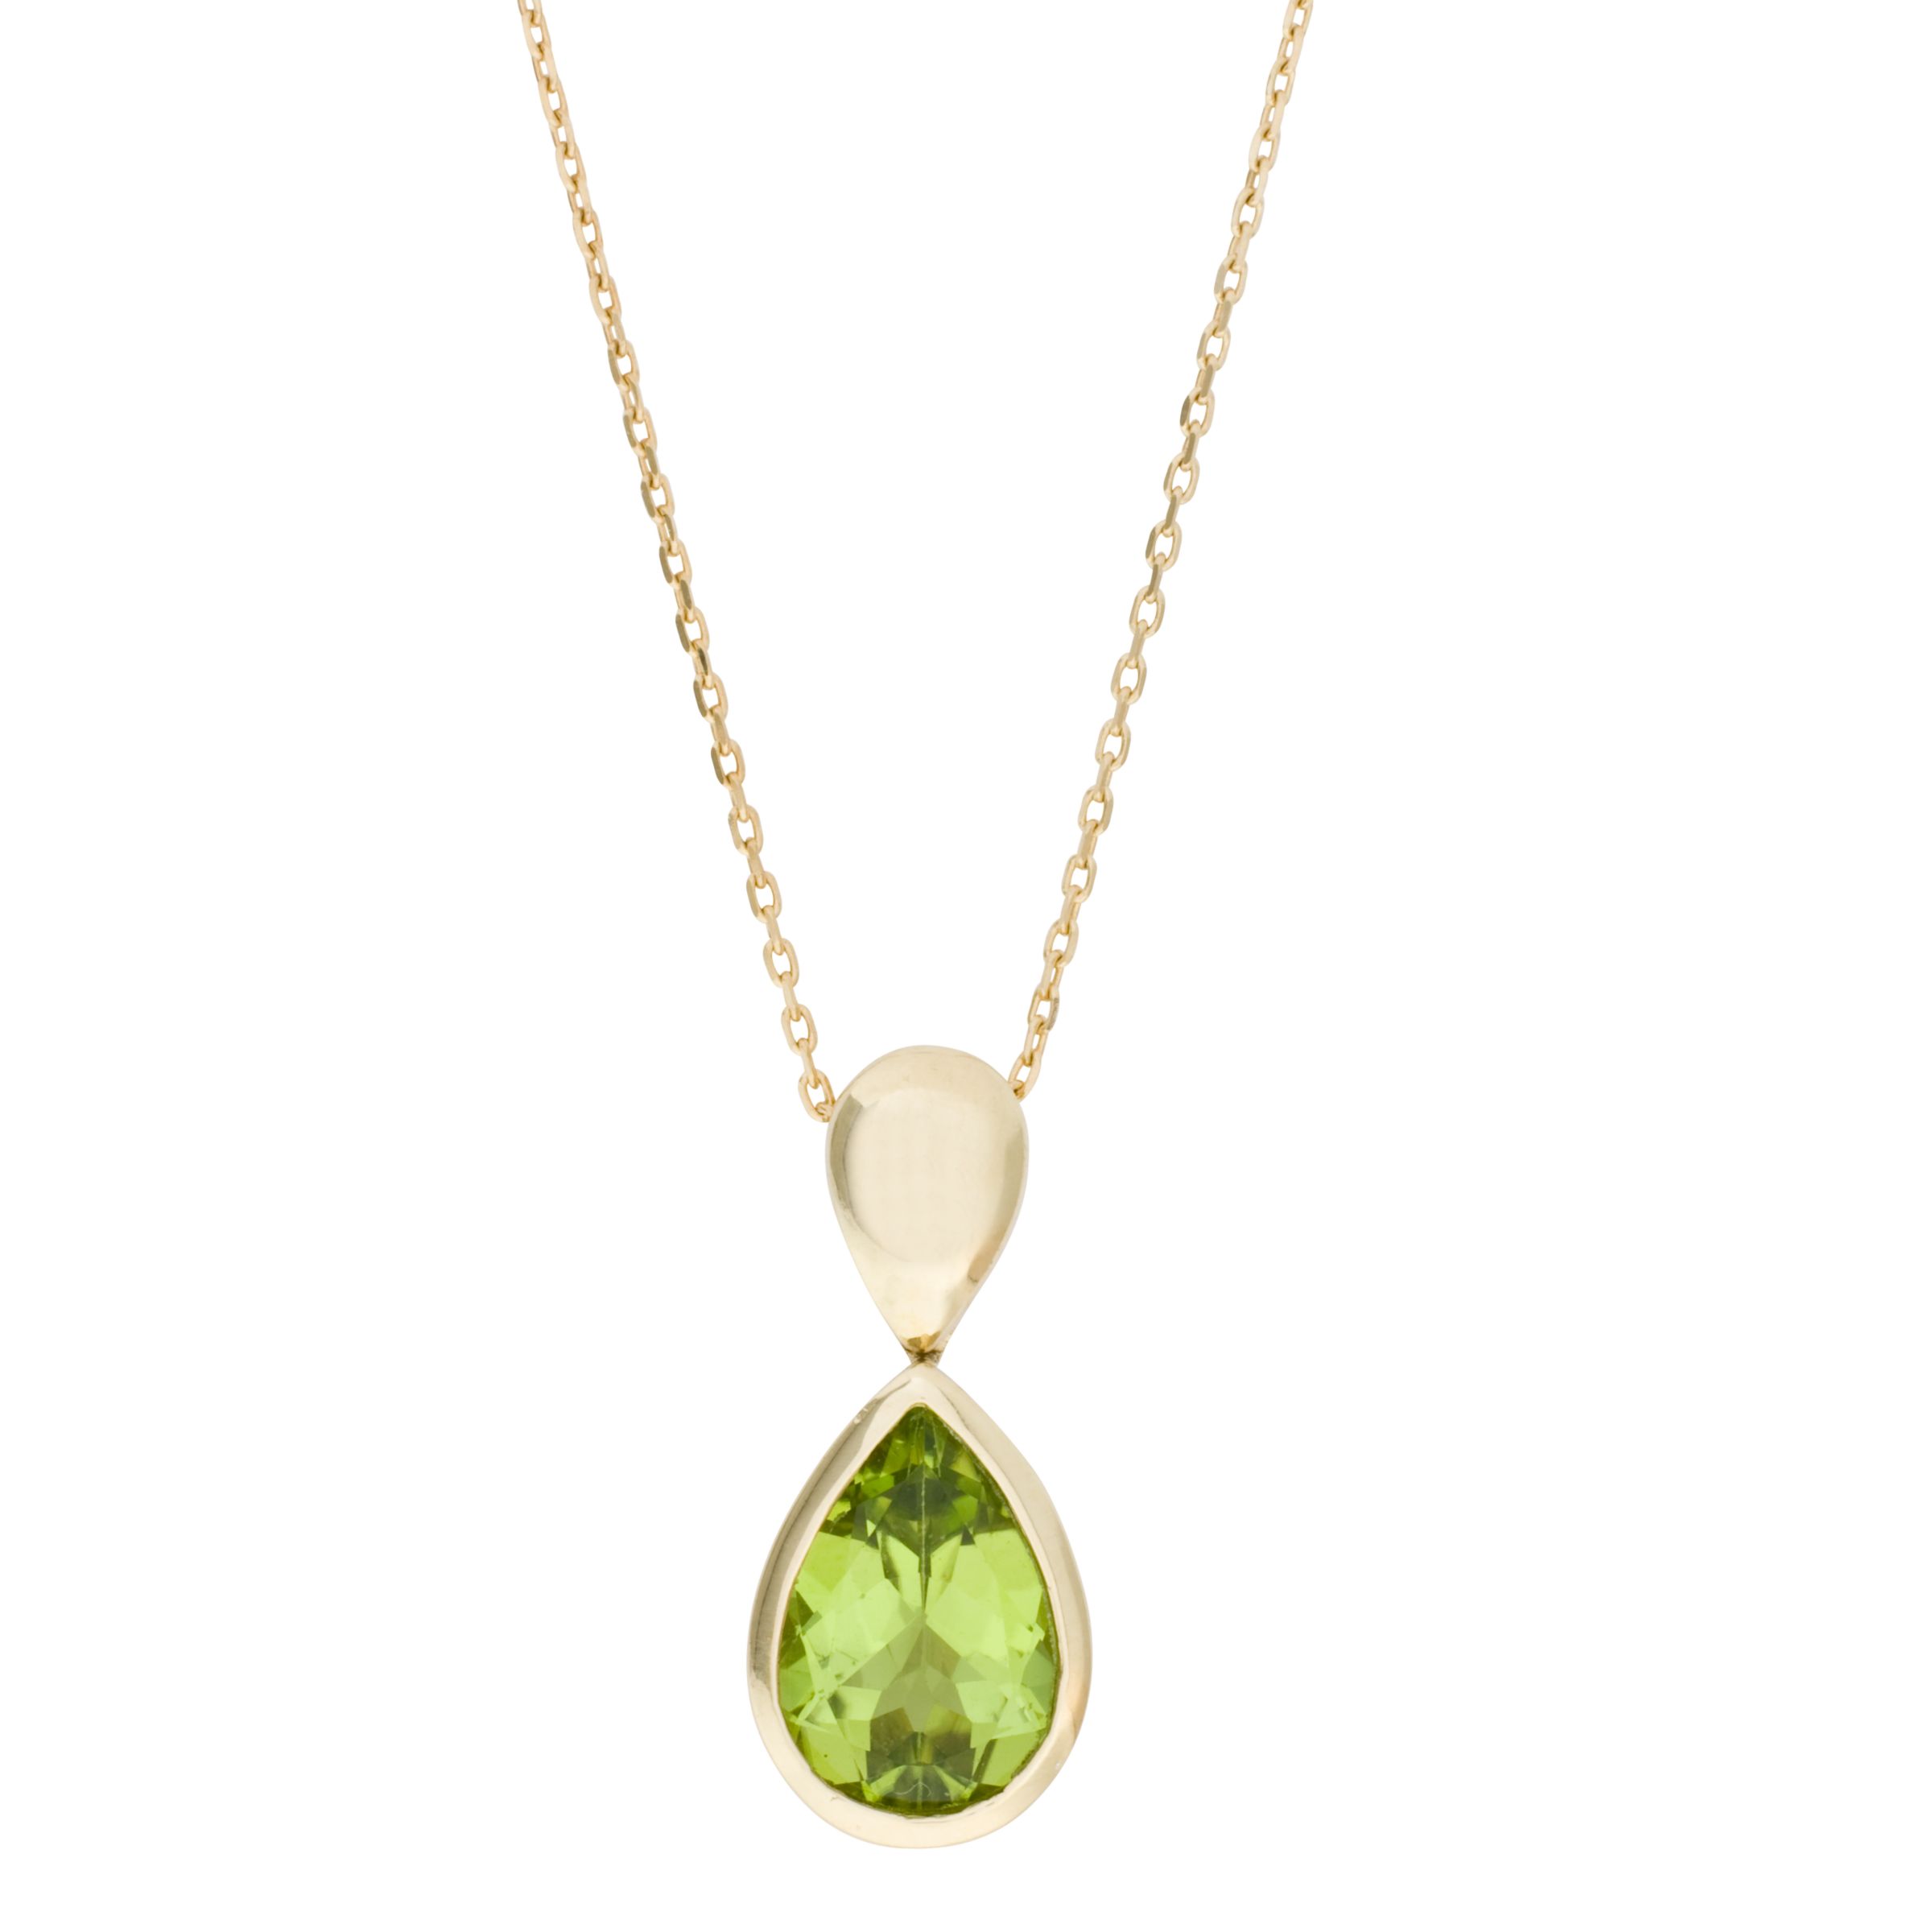 9ct Yellow Gold and Peridot Drop Pendant Necklace